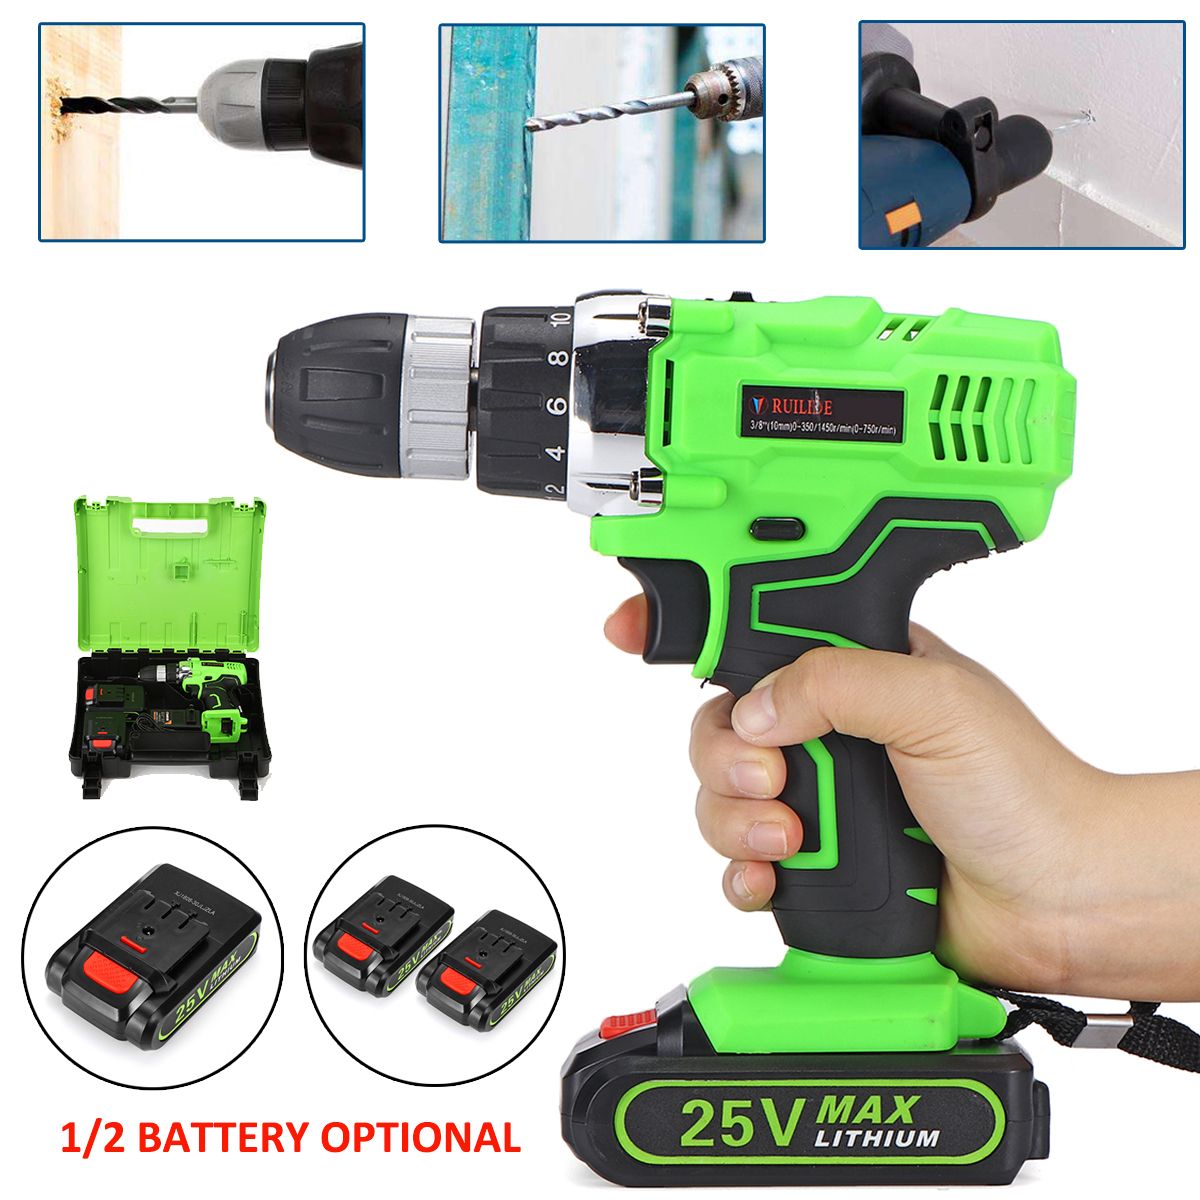 25V-Li-ion-Electric-Screwdriver-Dual-Speed-Power-Screw-Driver-Tool-For-DIY-Building-Engineering-1368106